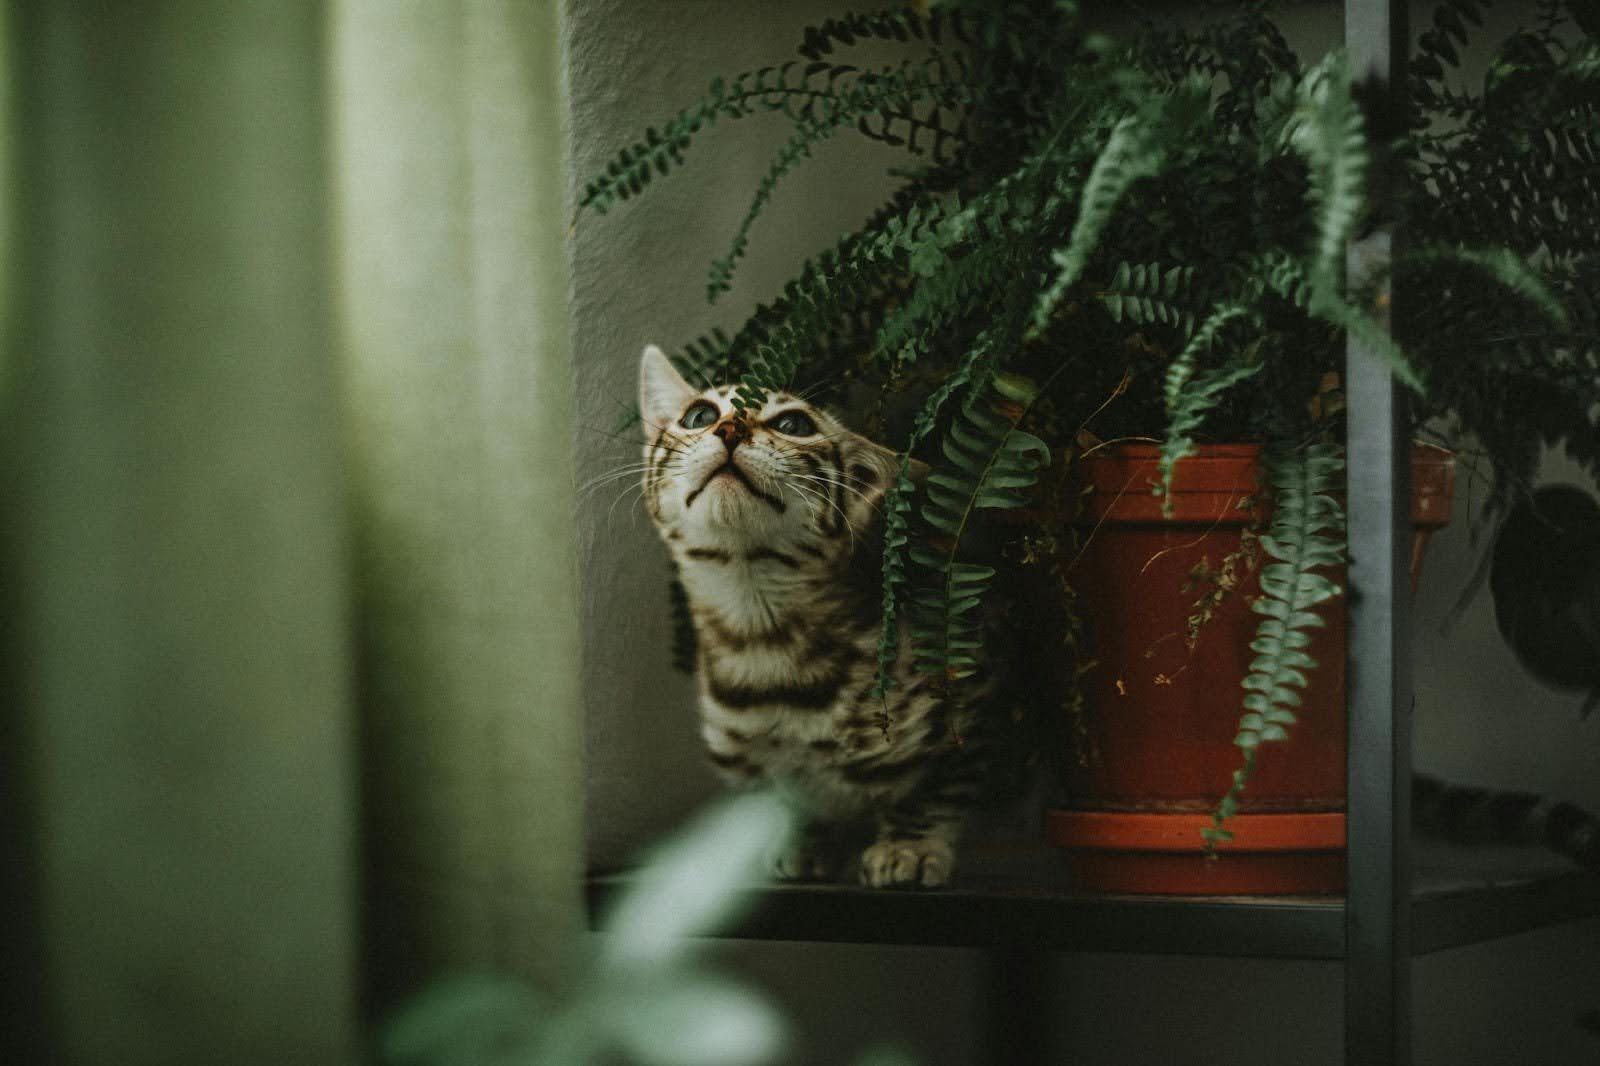 A cat is sitting on a shelf next to a potted plant.